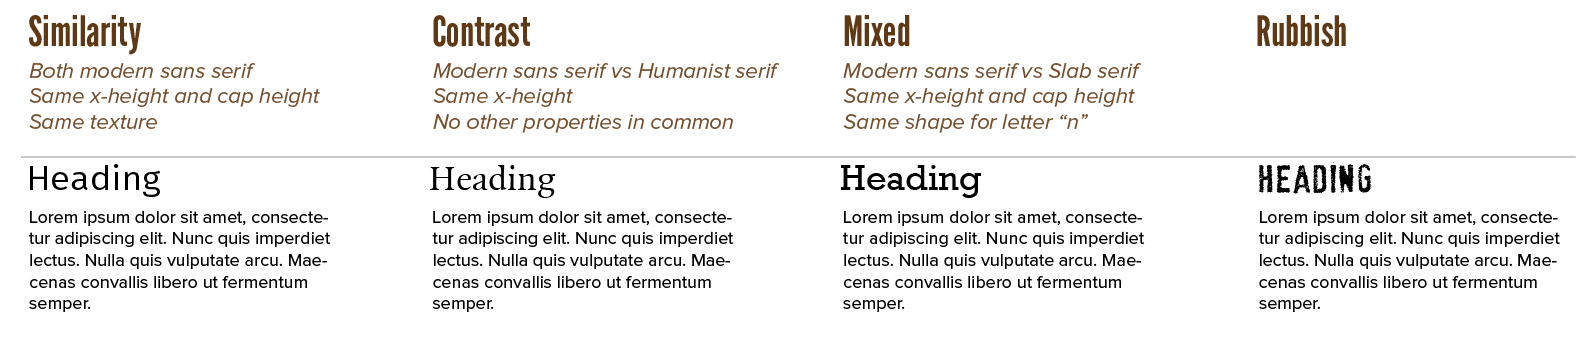 Examples of creating similarity and contrast between fonts.